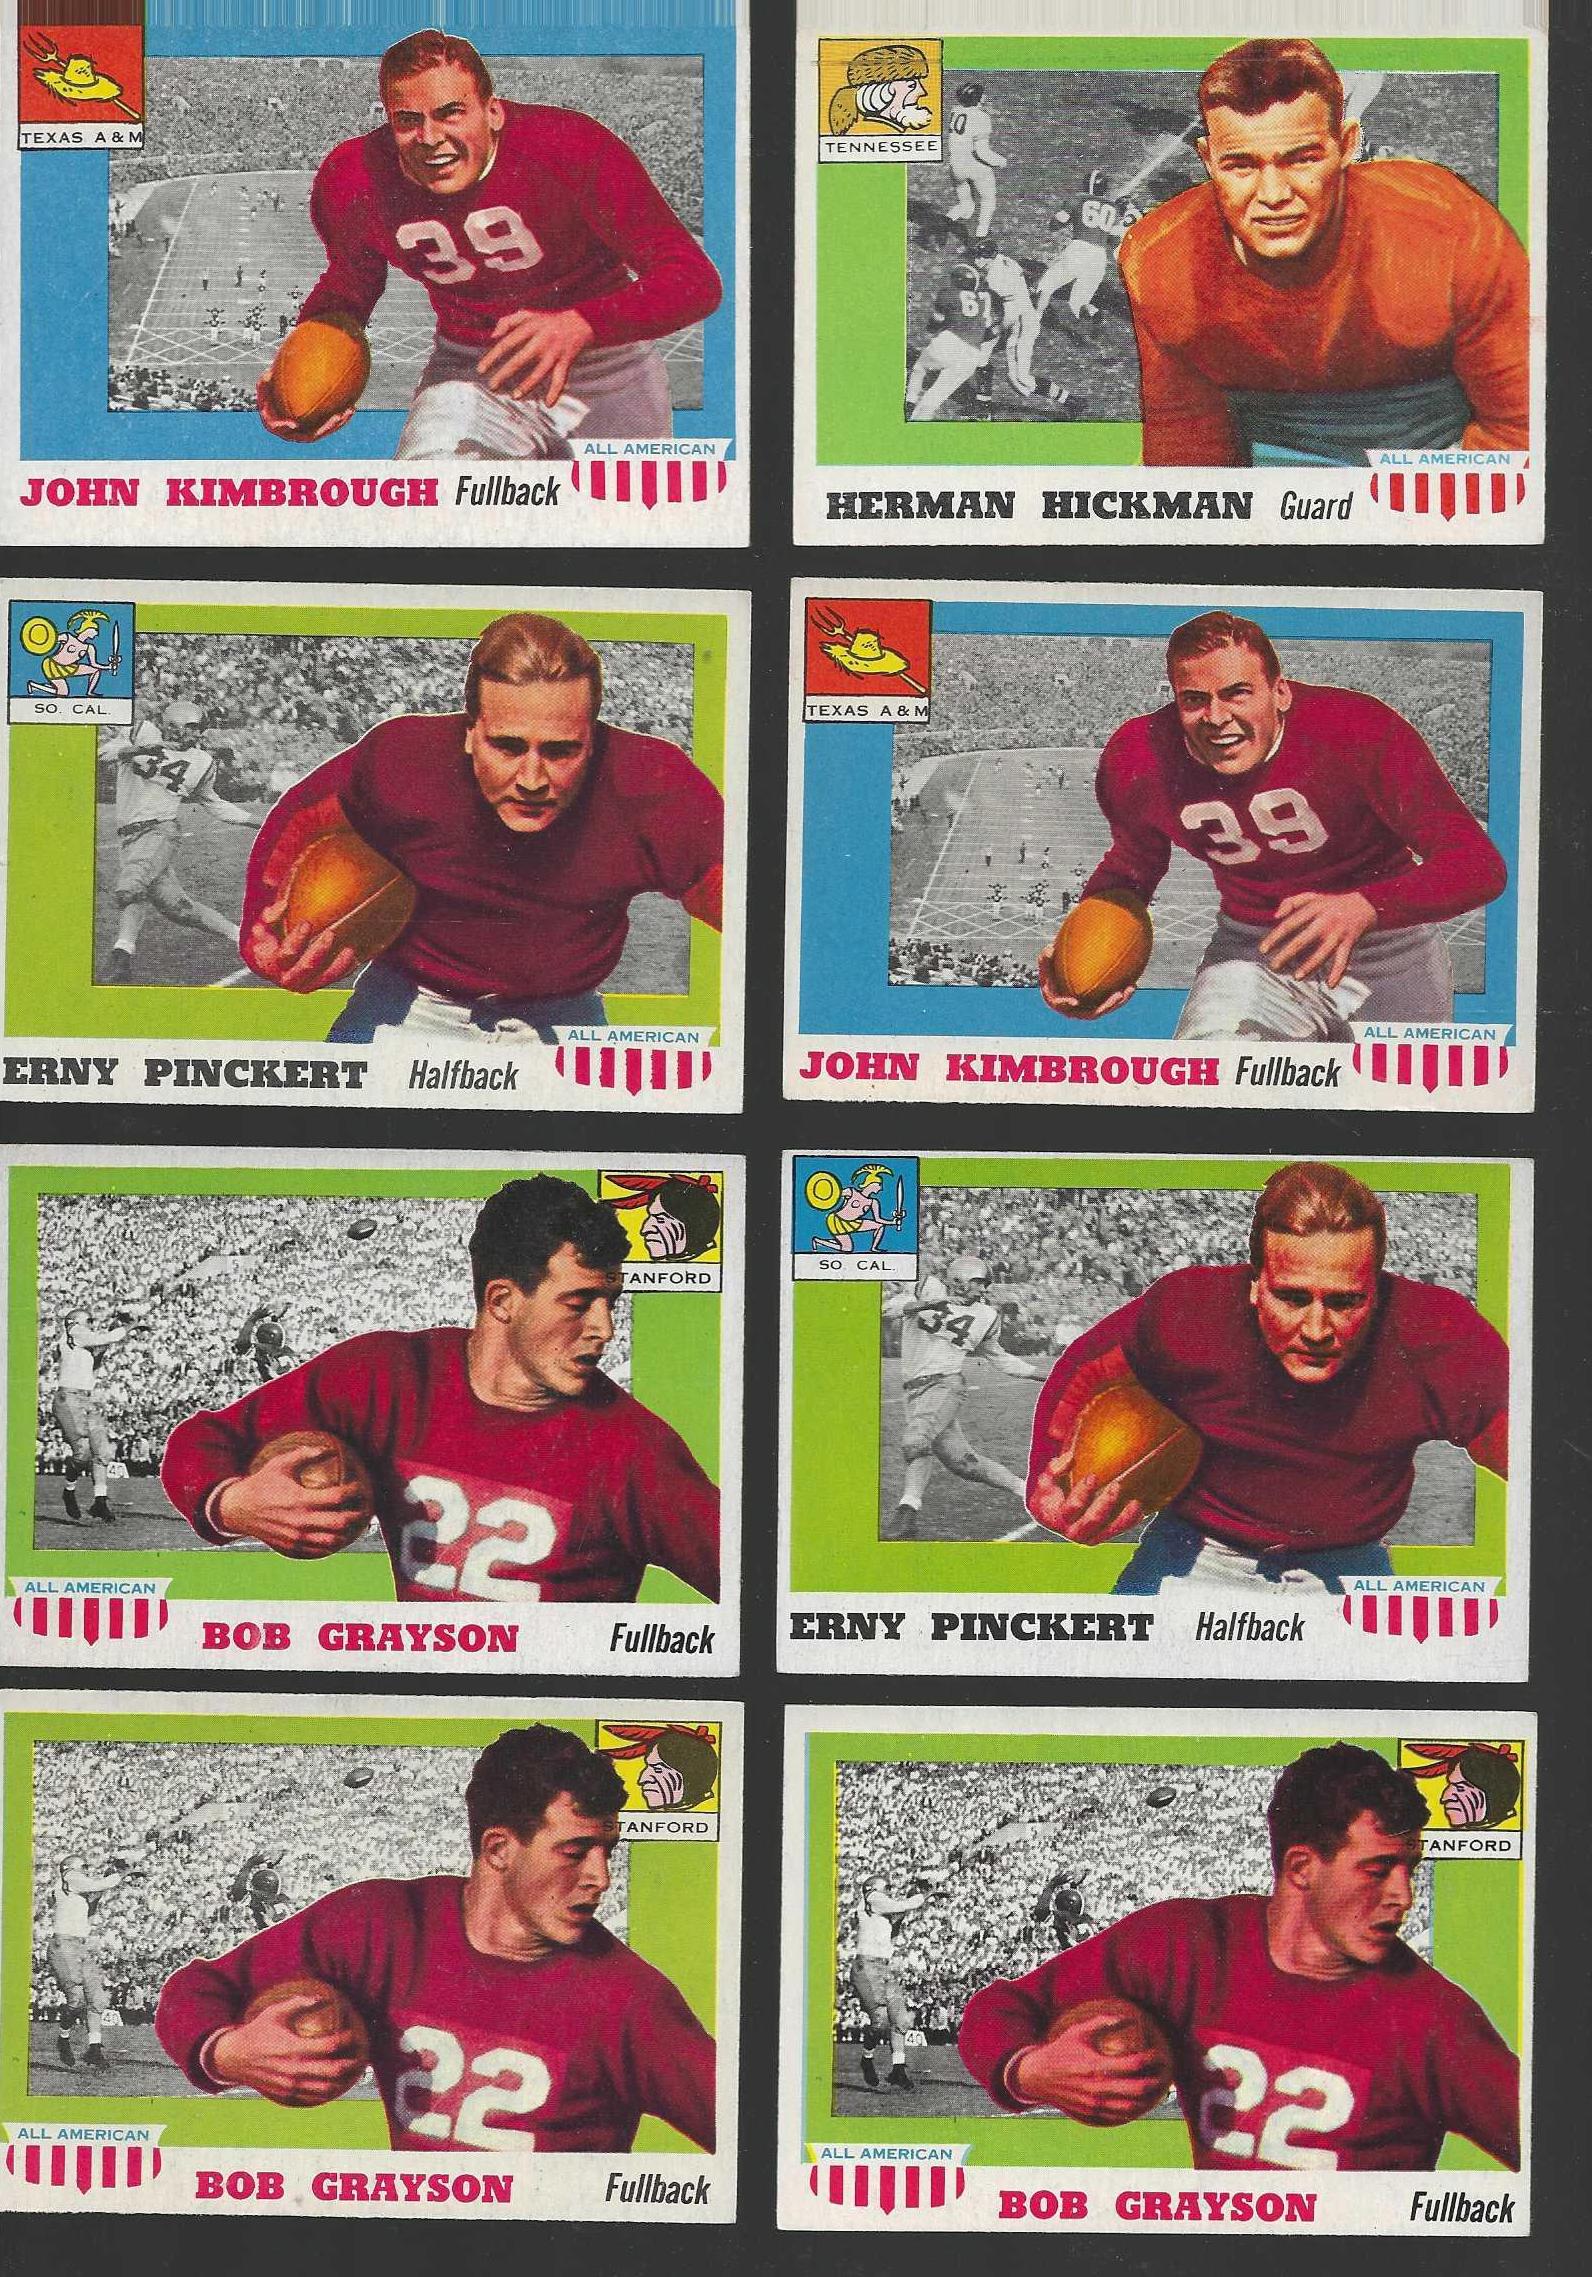 1955 Topps ALL-AMERICAN FB #  5 Bobby Grayson (STANFORD) Football cards value